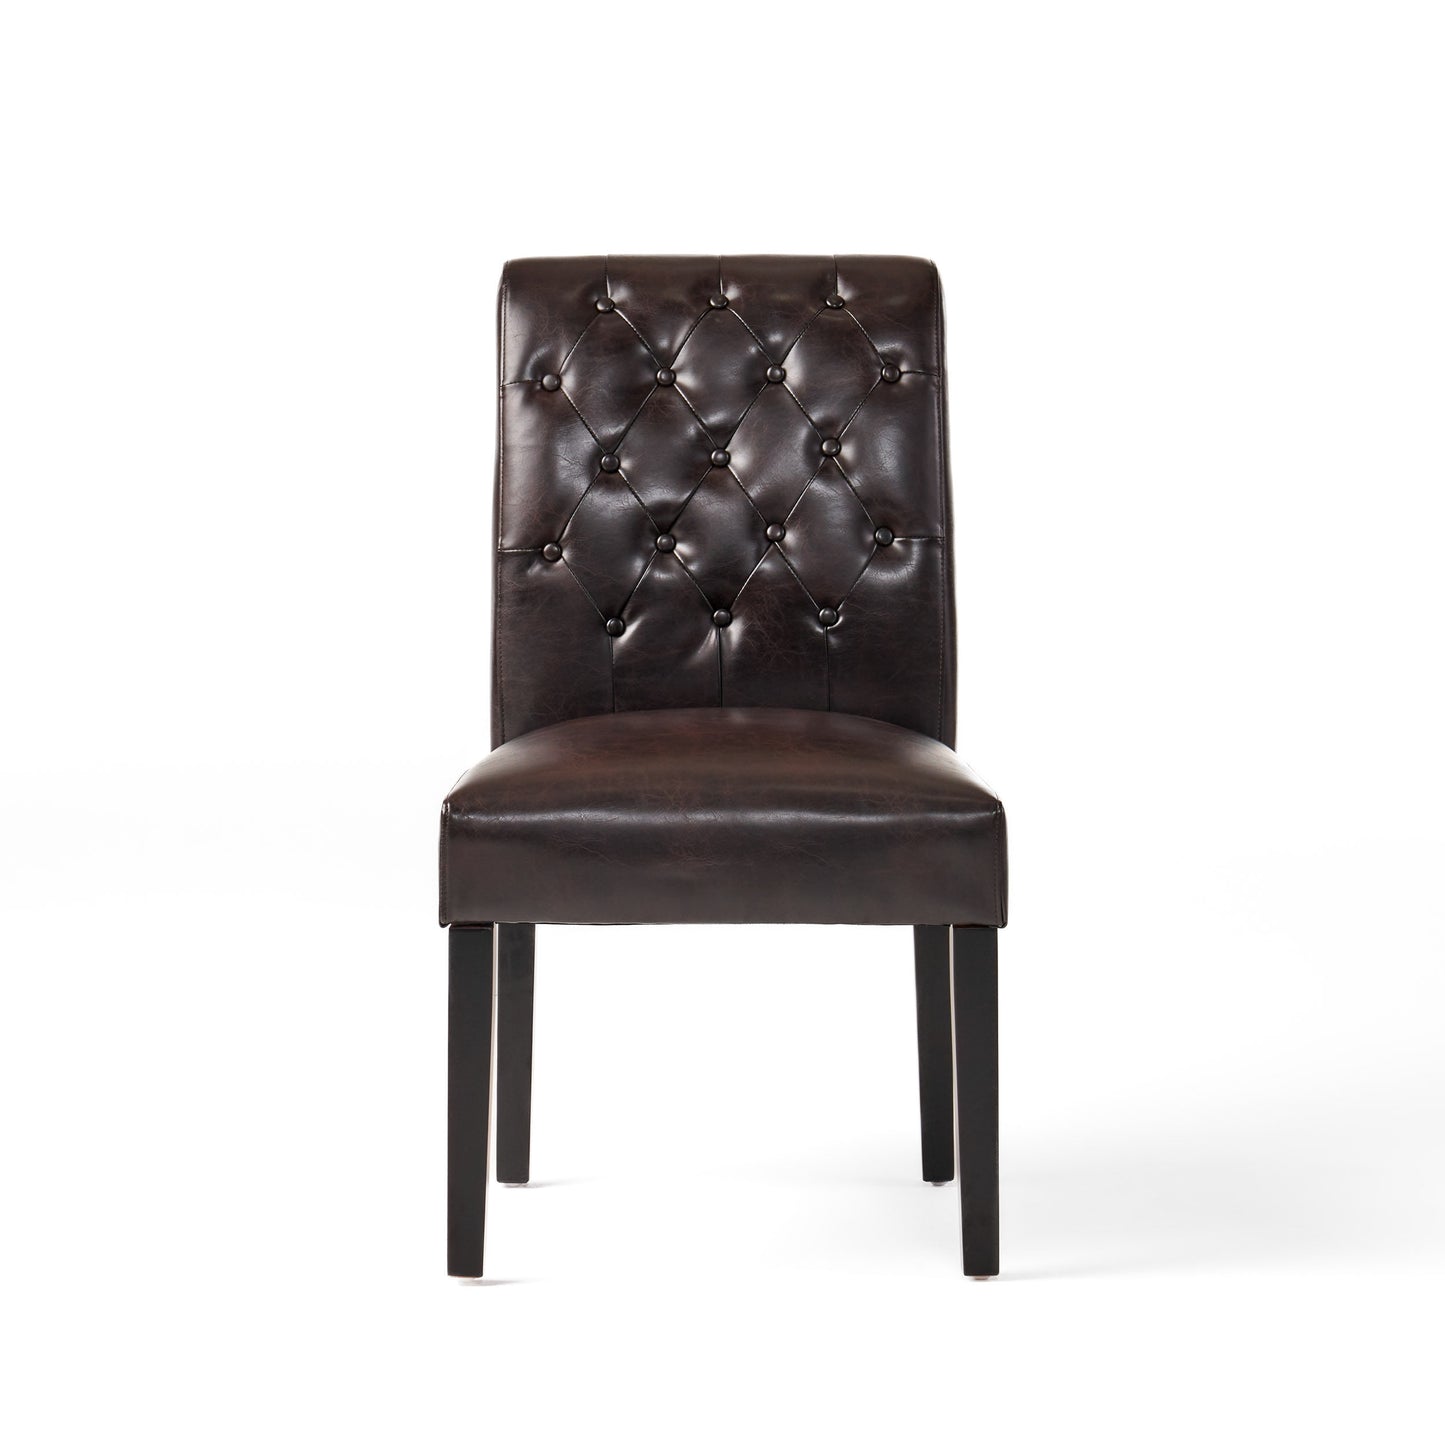 Elliston Leather Tufted Dining Chairs (Set of 2)